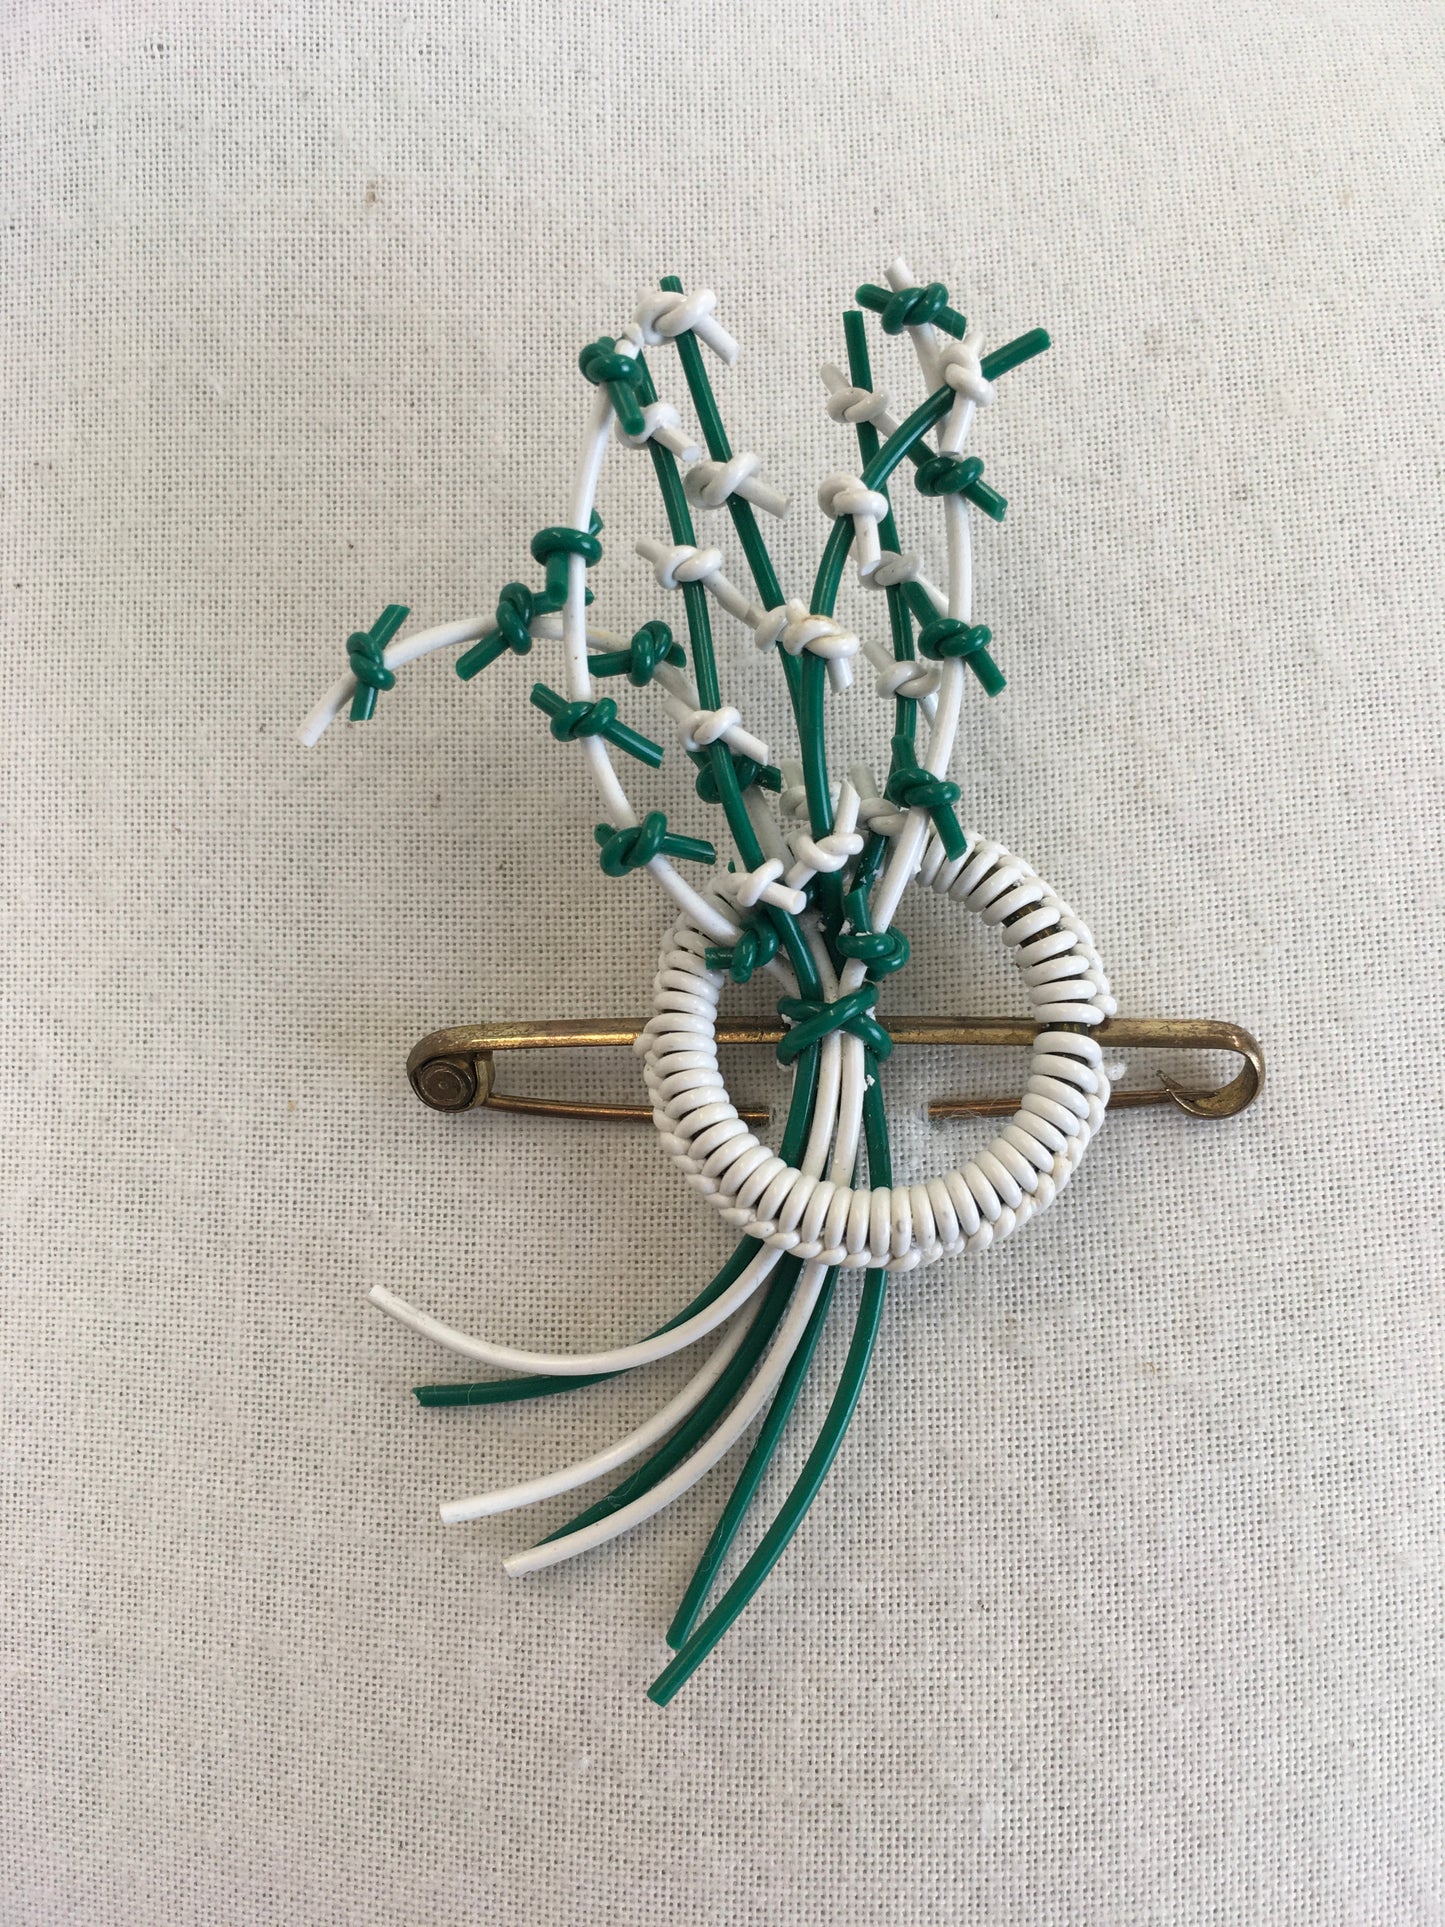 Original 1940’s Make do And Mend Telephone Cord Brooch - In Jade Green & White